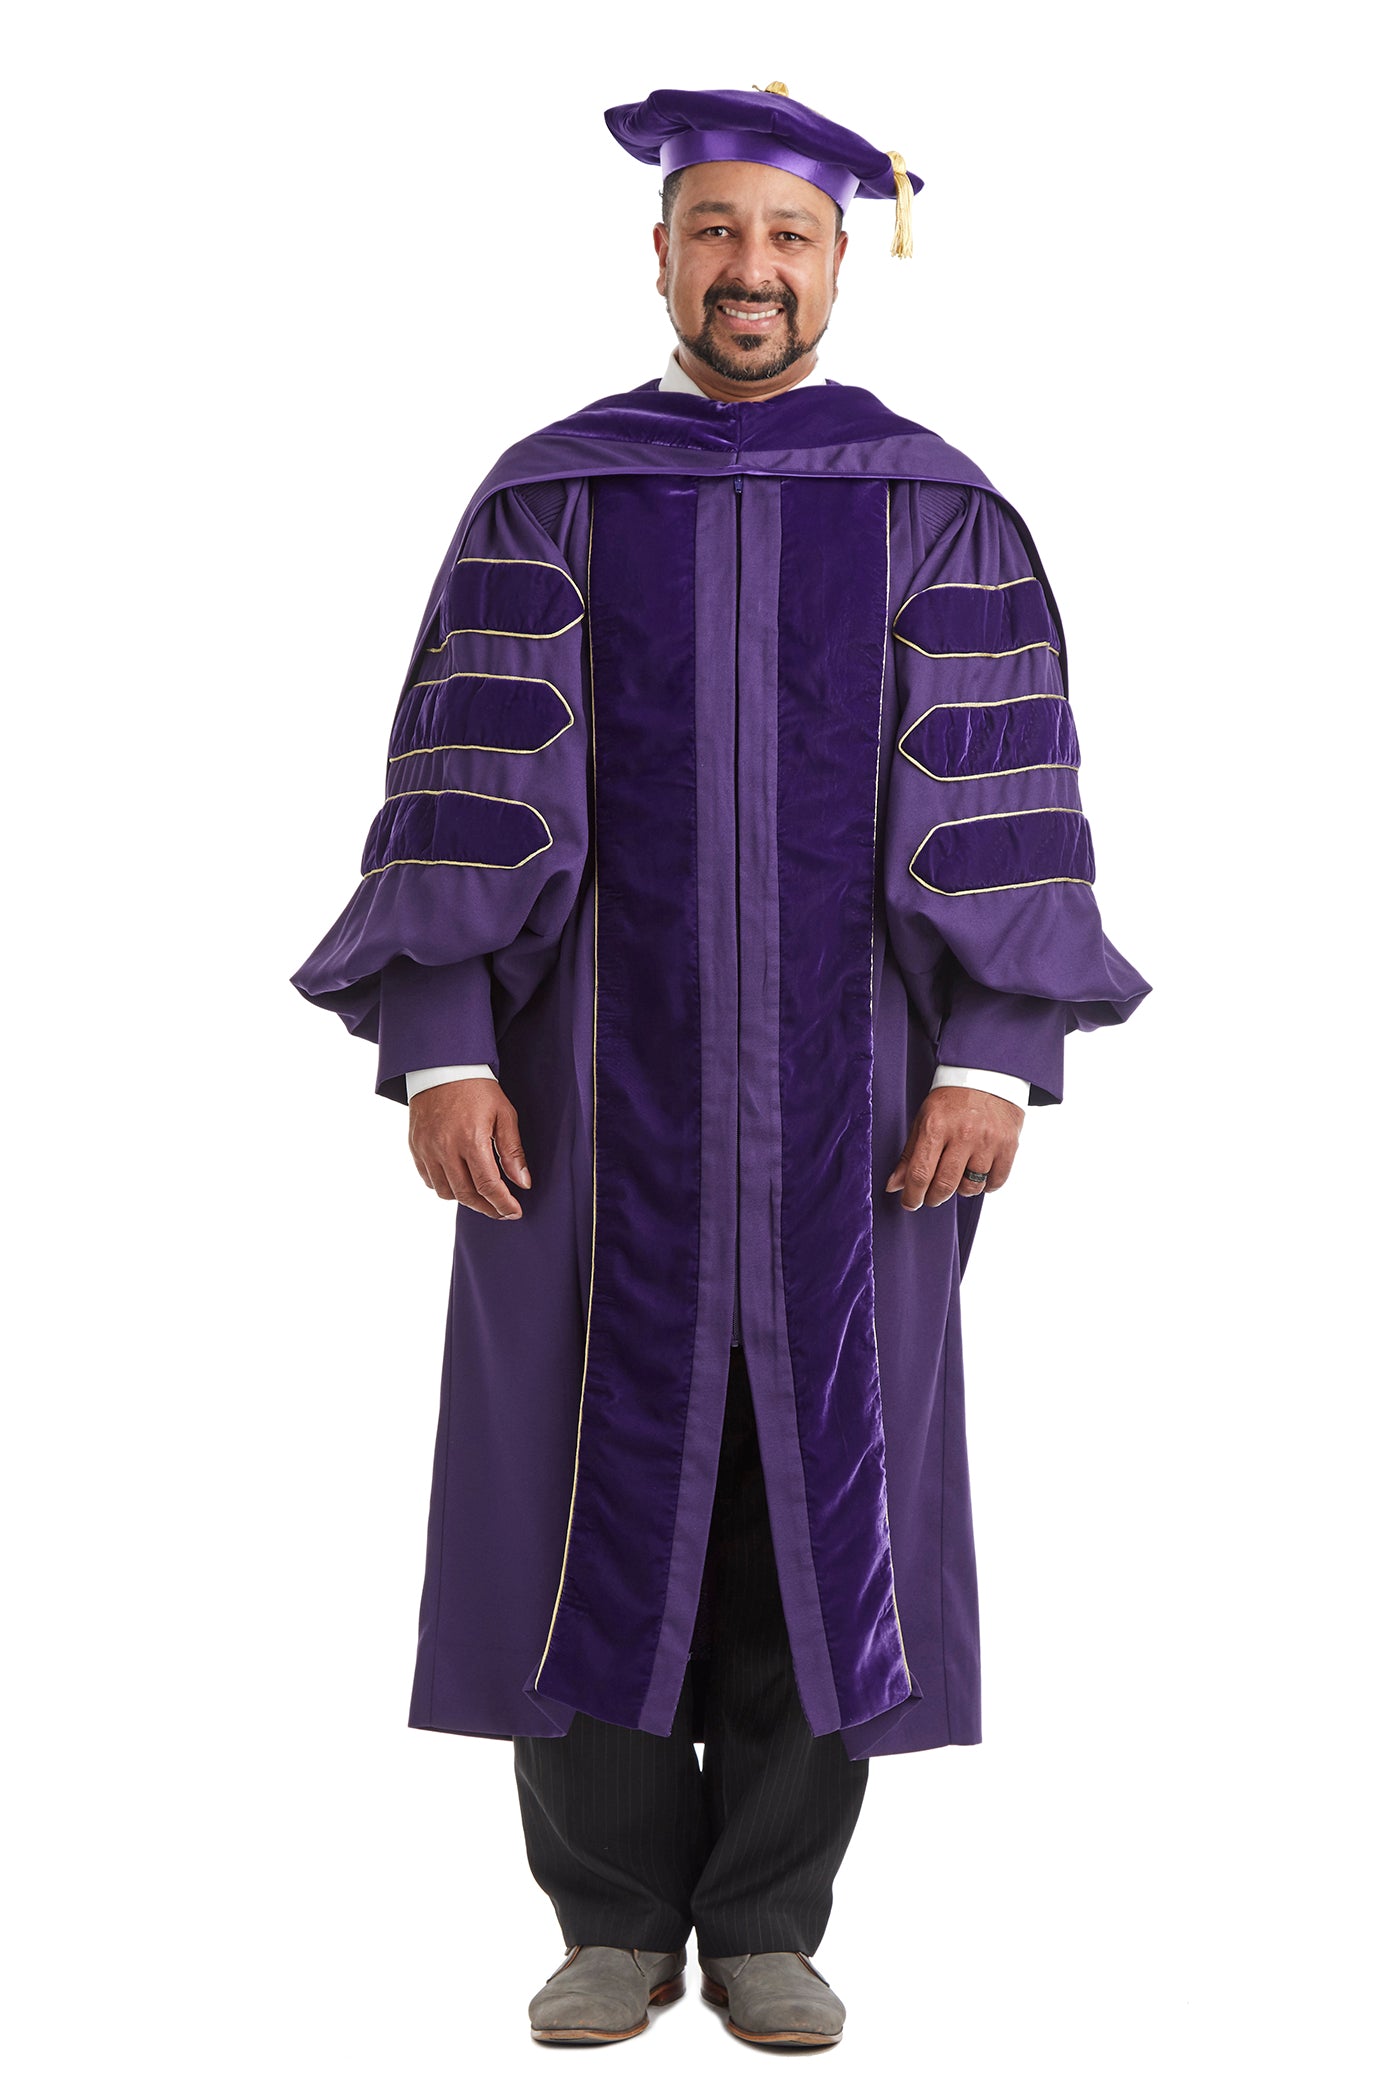 Graduation Cap and Gown History | GraduationSource